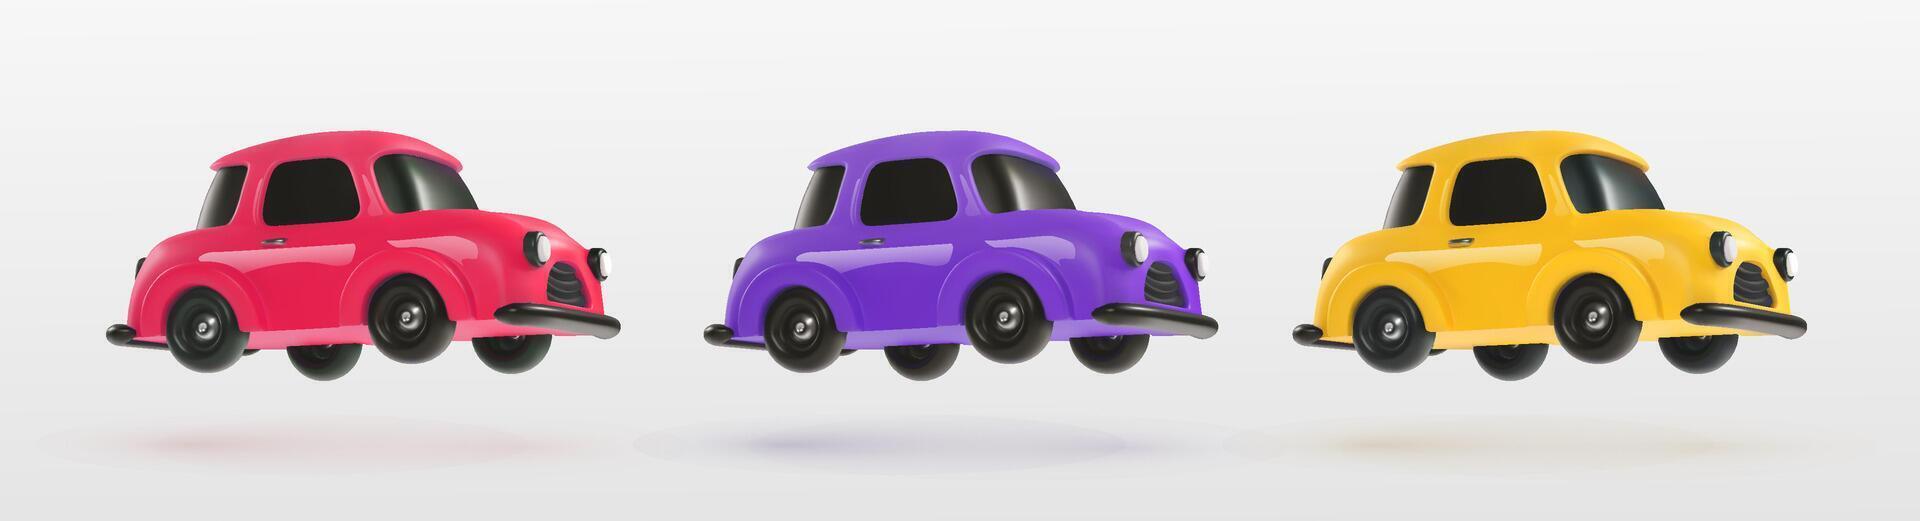 Colorful toy vehicle cars on light background. Collection of red, purple, yellow color mini model cars. 3d vector design elements on white background.